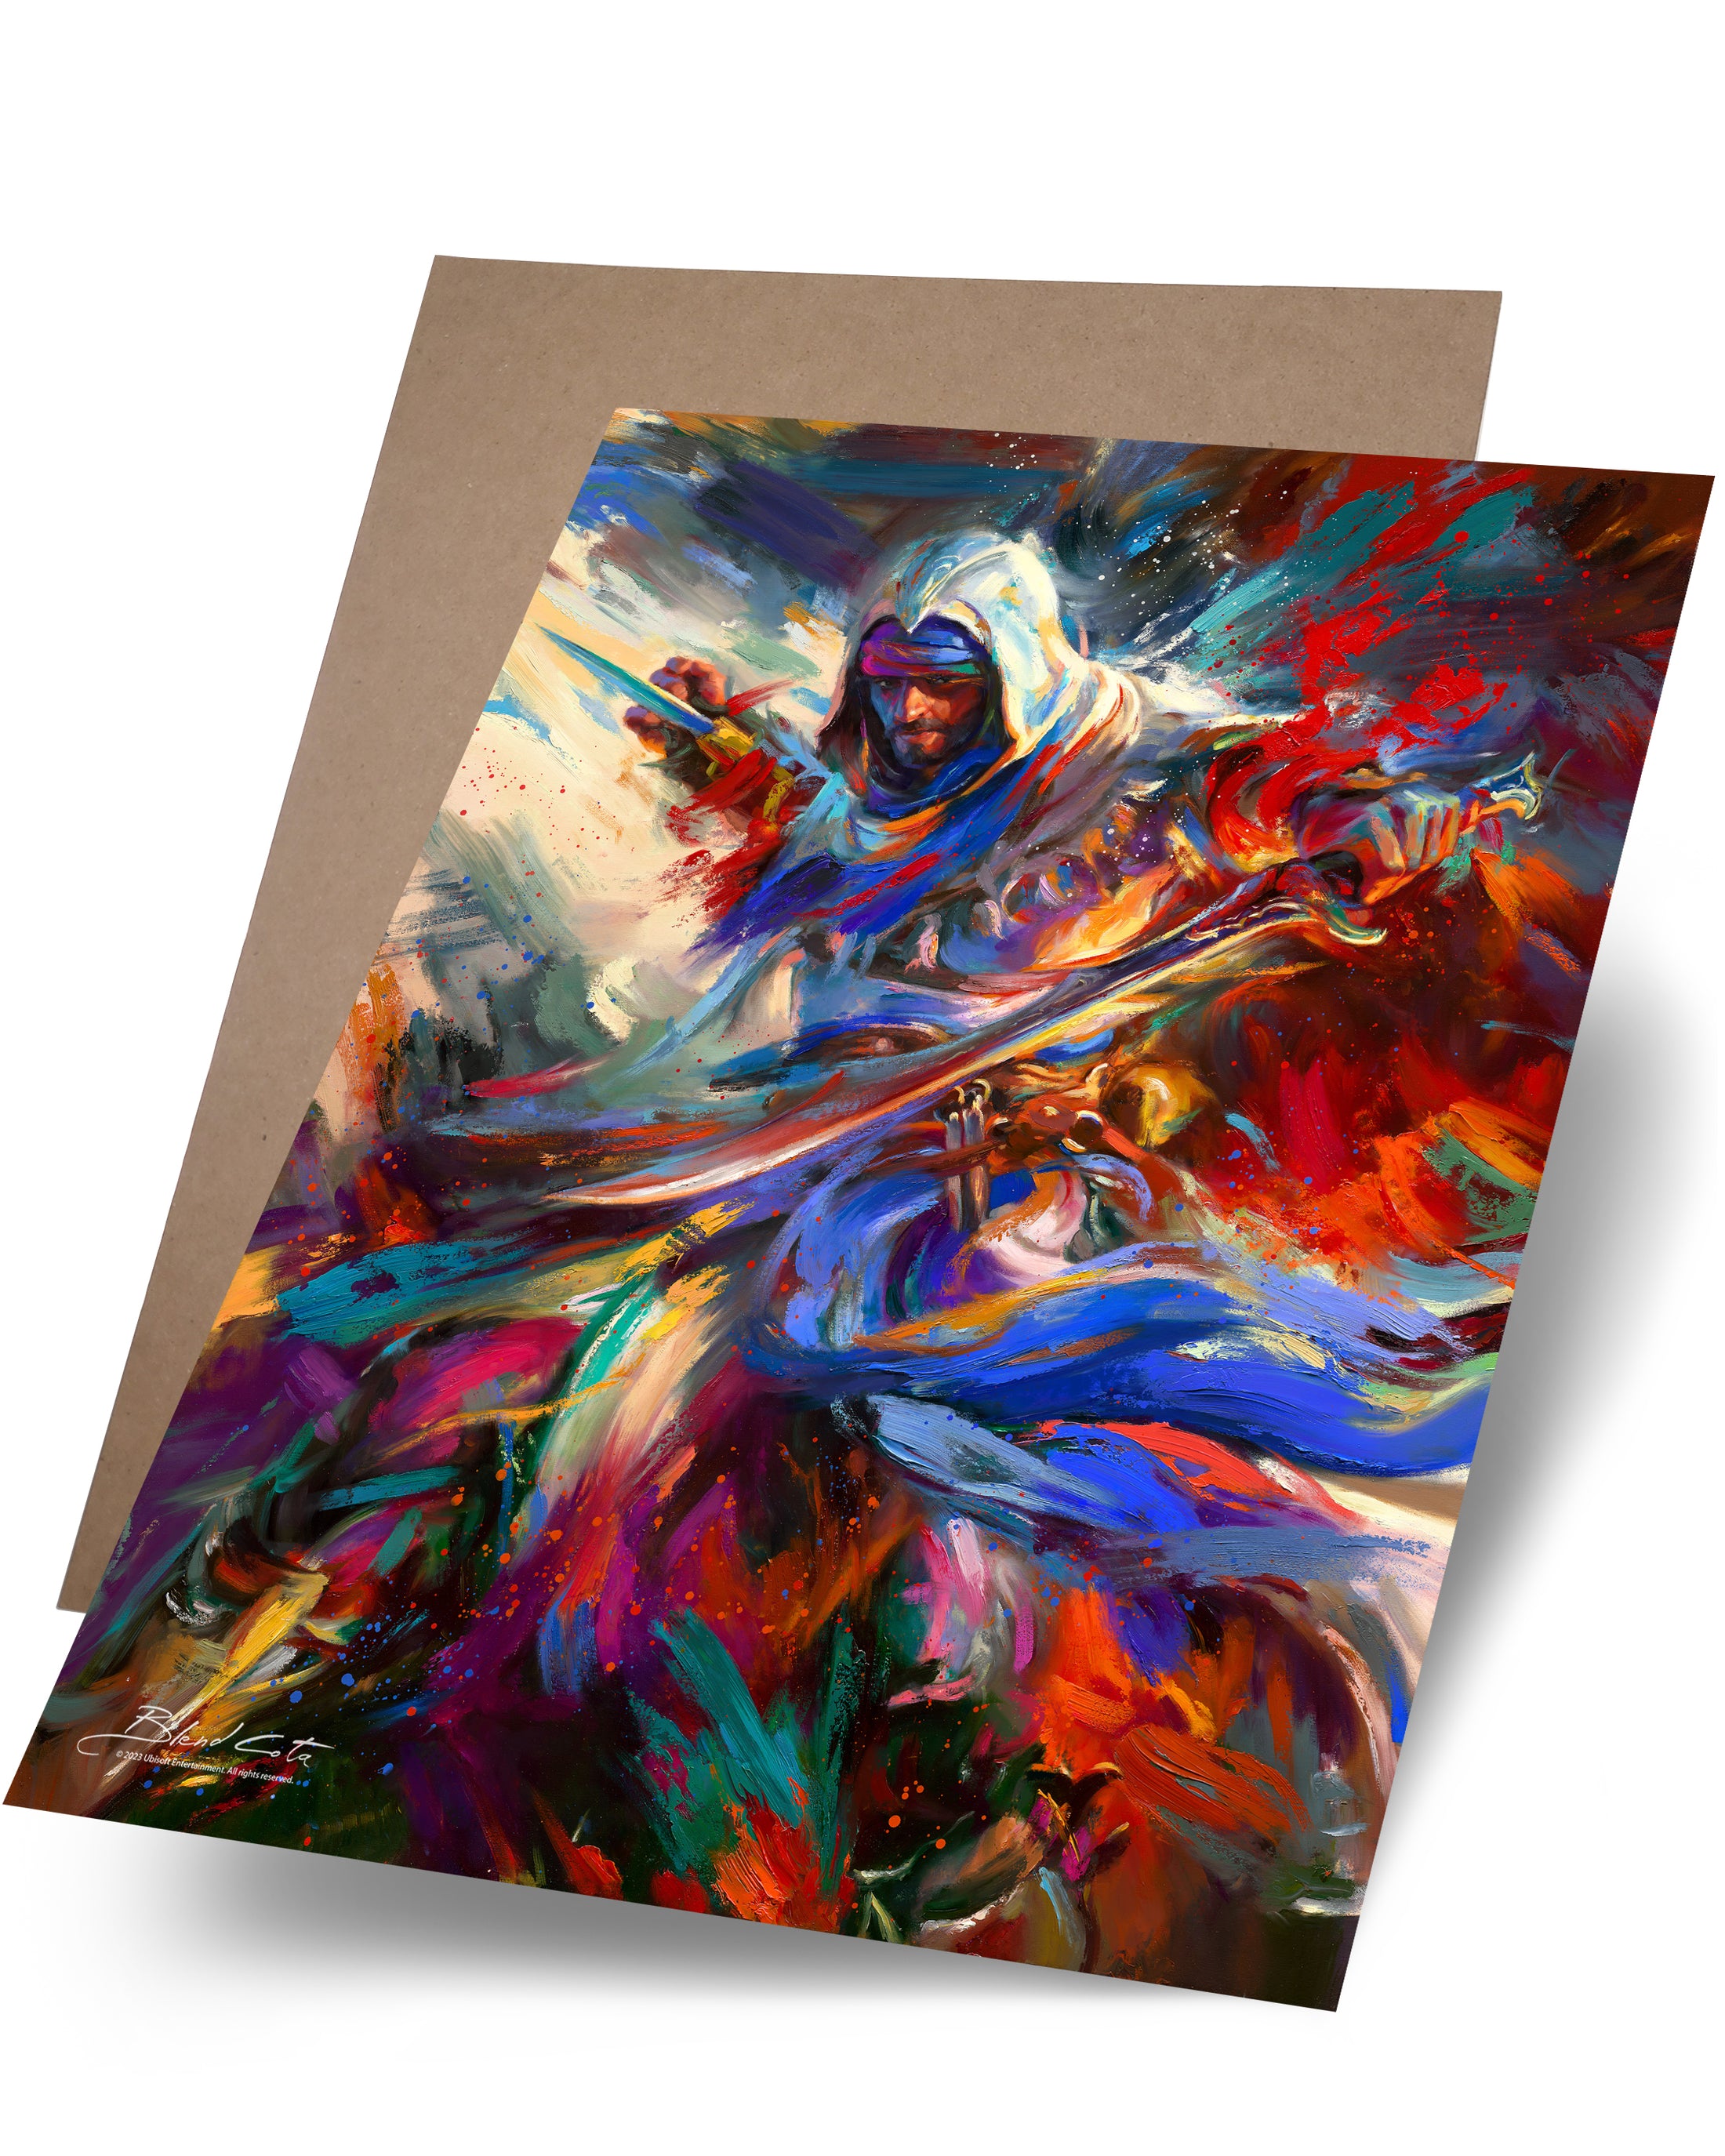 Paper print on cardstock  of Assassin's Creed Basim of Mirage bursting forth with energy and painted with colorful brushstrokes in an expressionistic style.